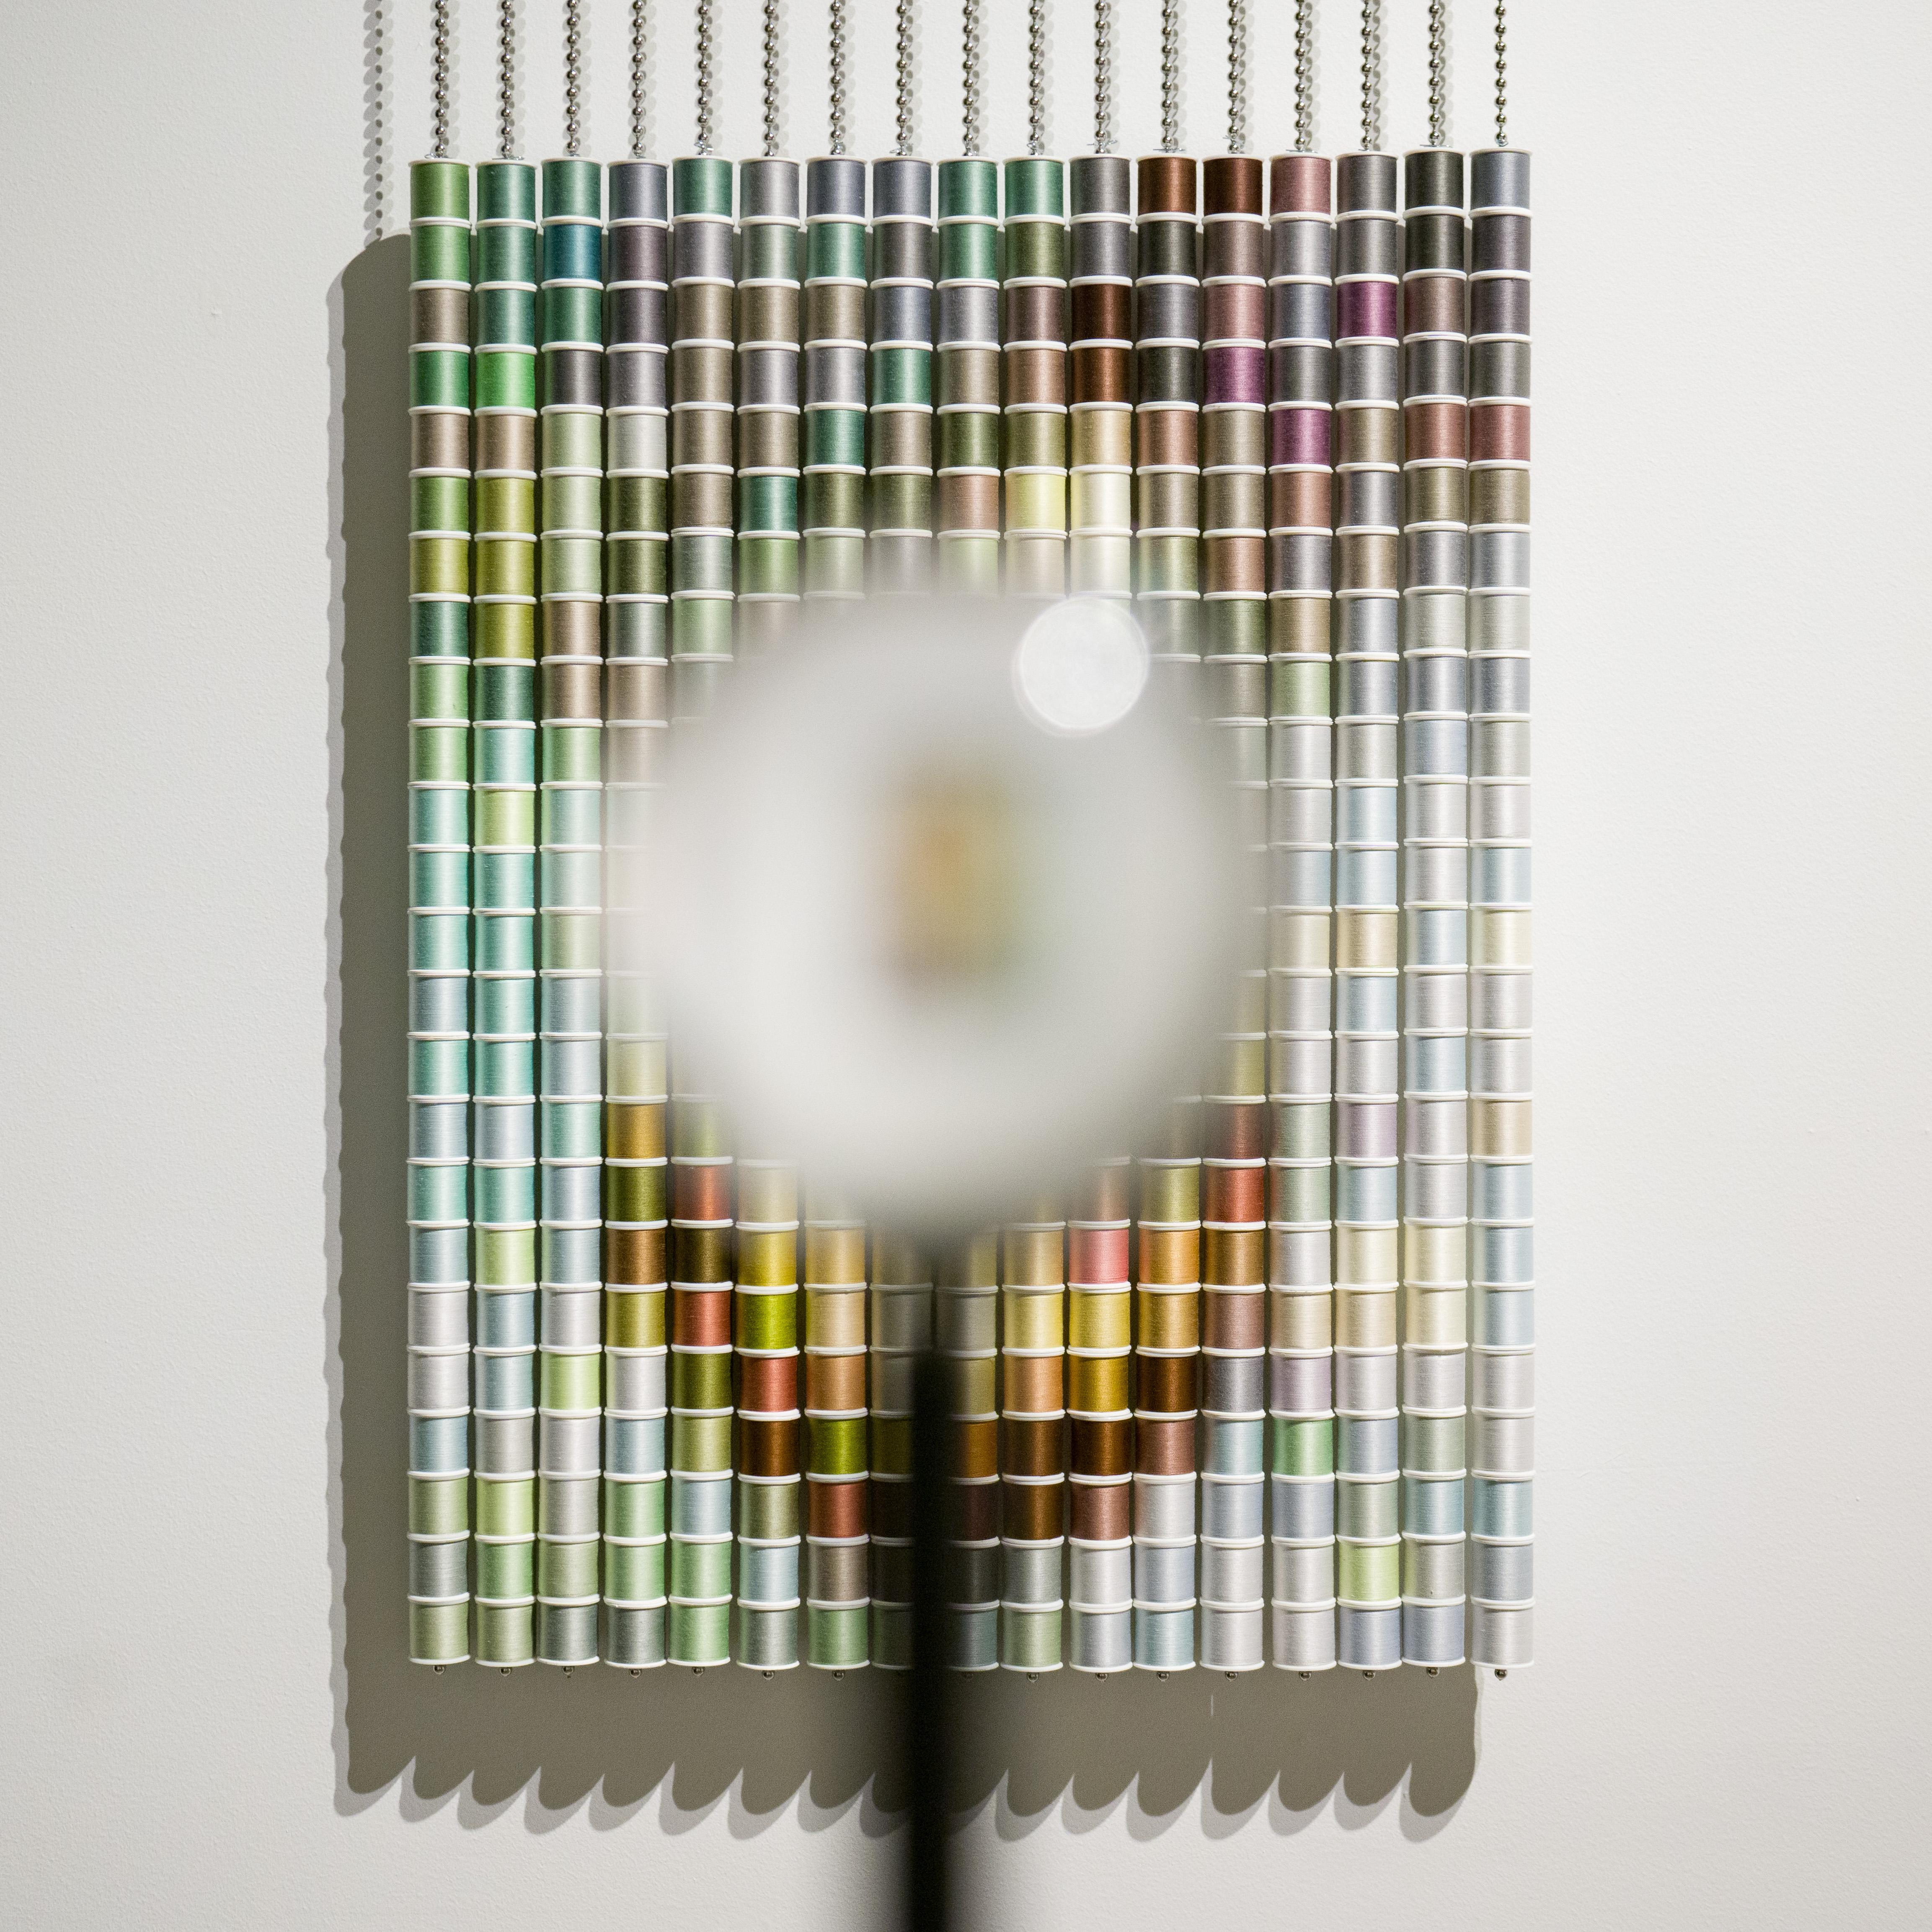 408 spools of thread, aluminum ball chain and hanging apparatus, clear acrylic sphere, steel stand, edition 4 of 5

Devorah Sperber’s work exists at the intersection of art, science, and technology.  Following the centuries-long tradition of